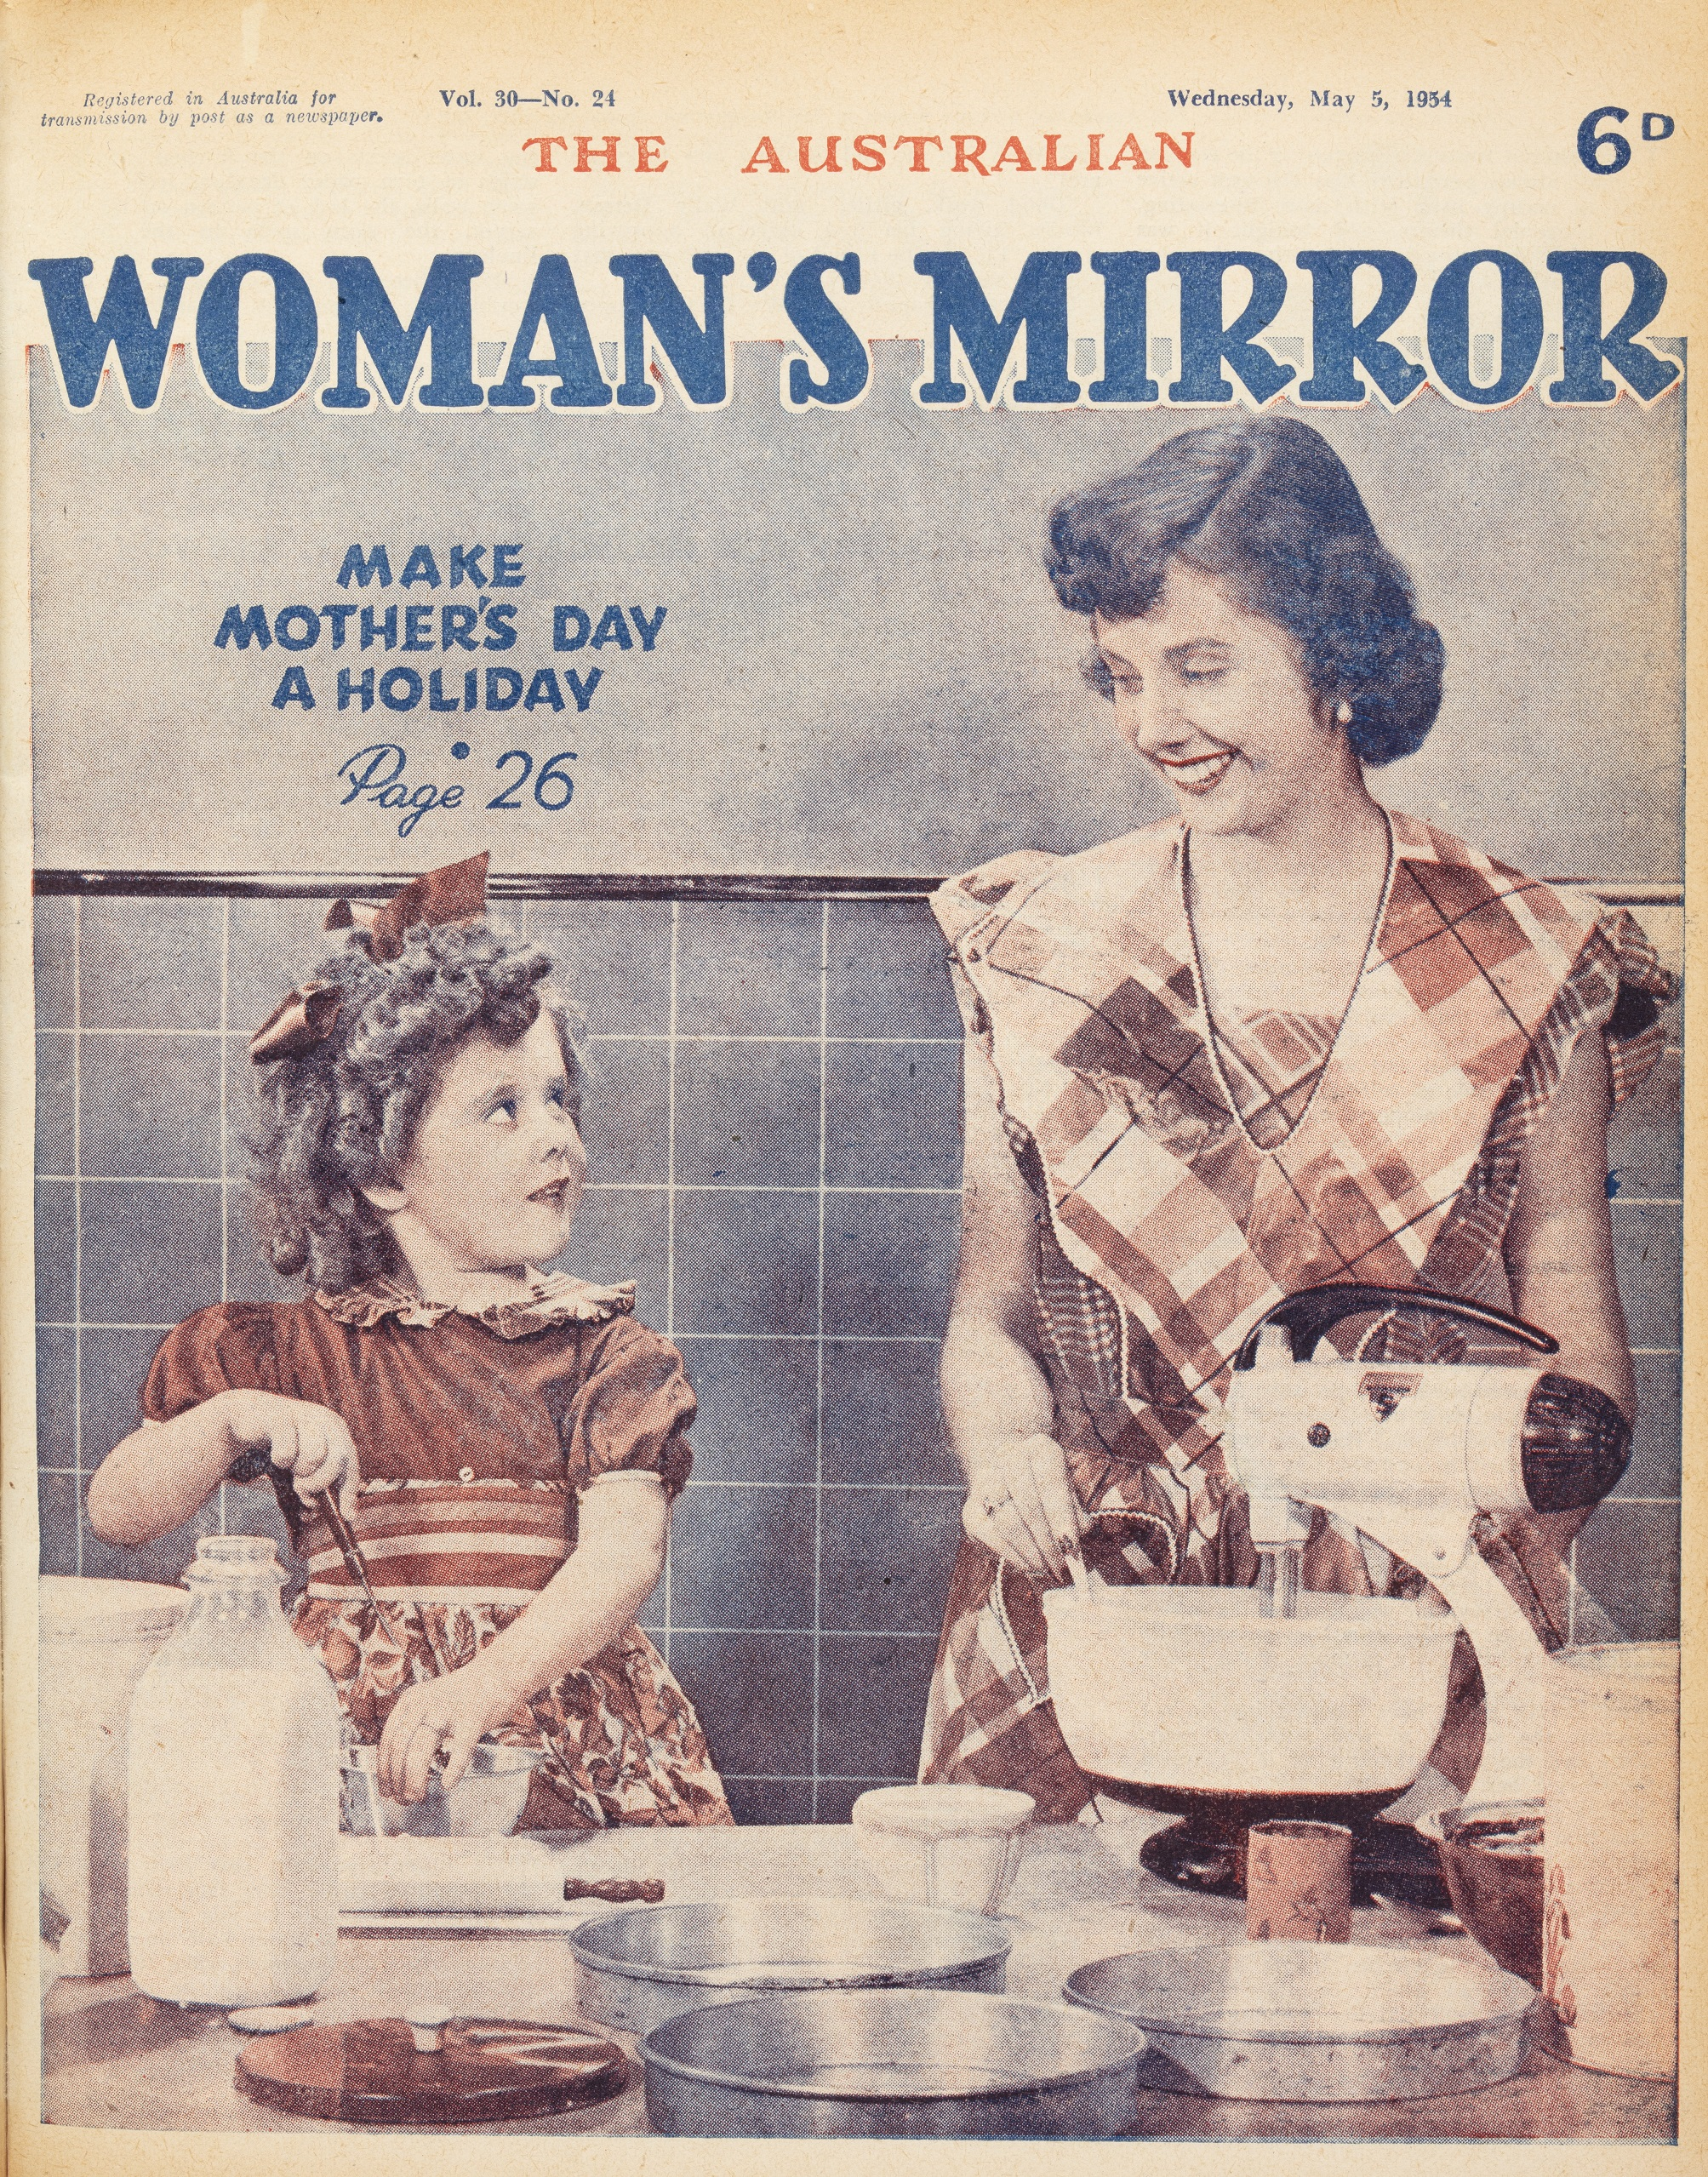 historical women's magazine showing a mother and daughter baking